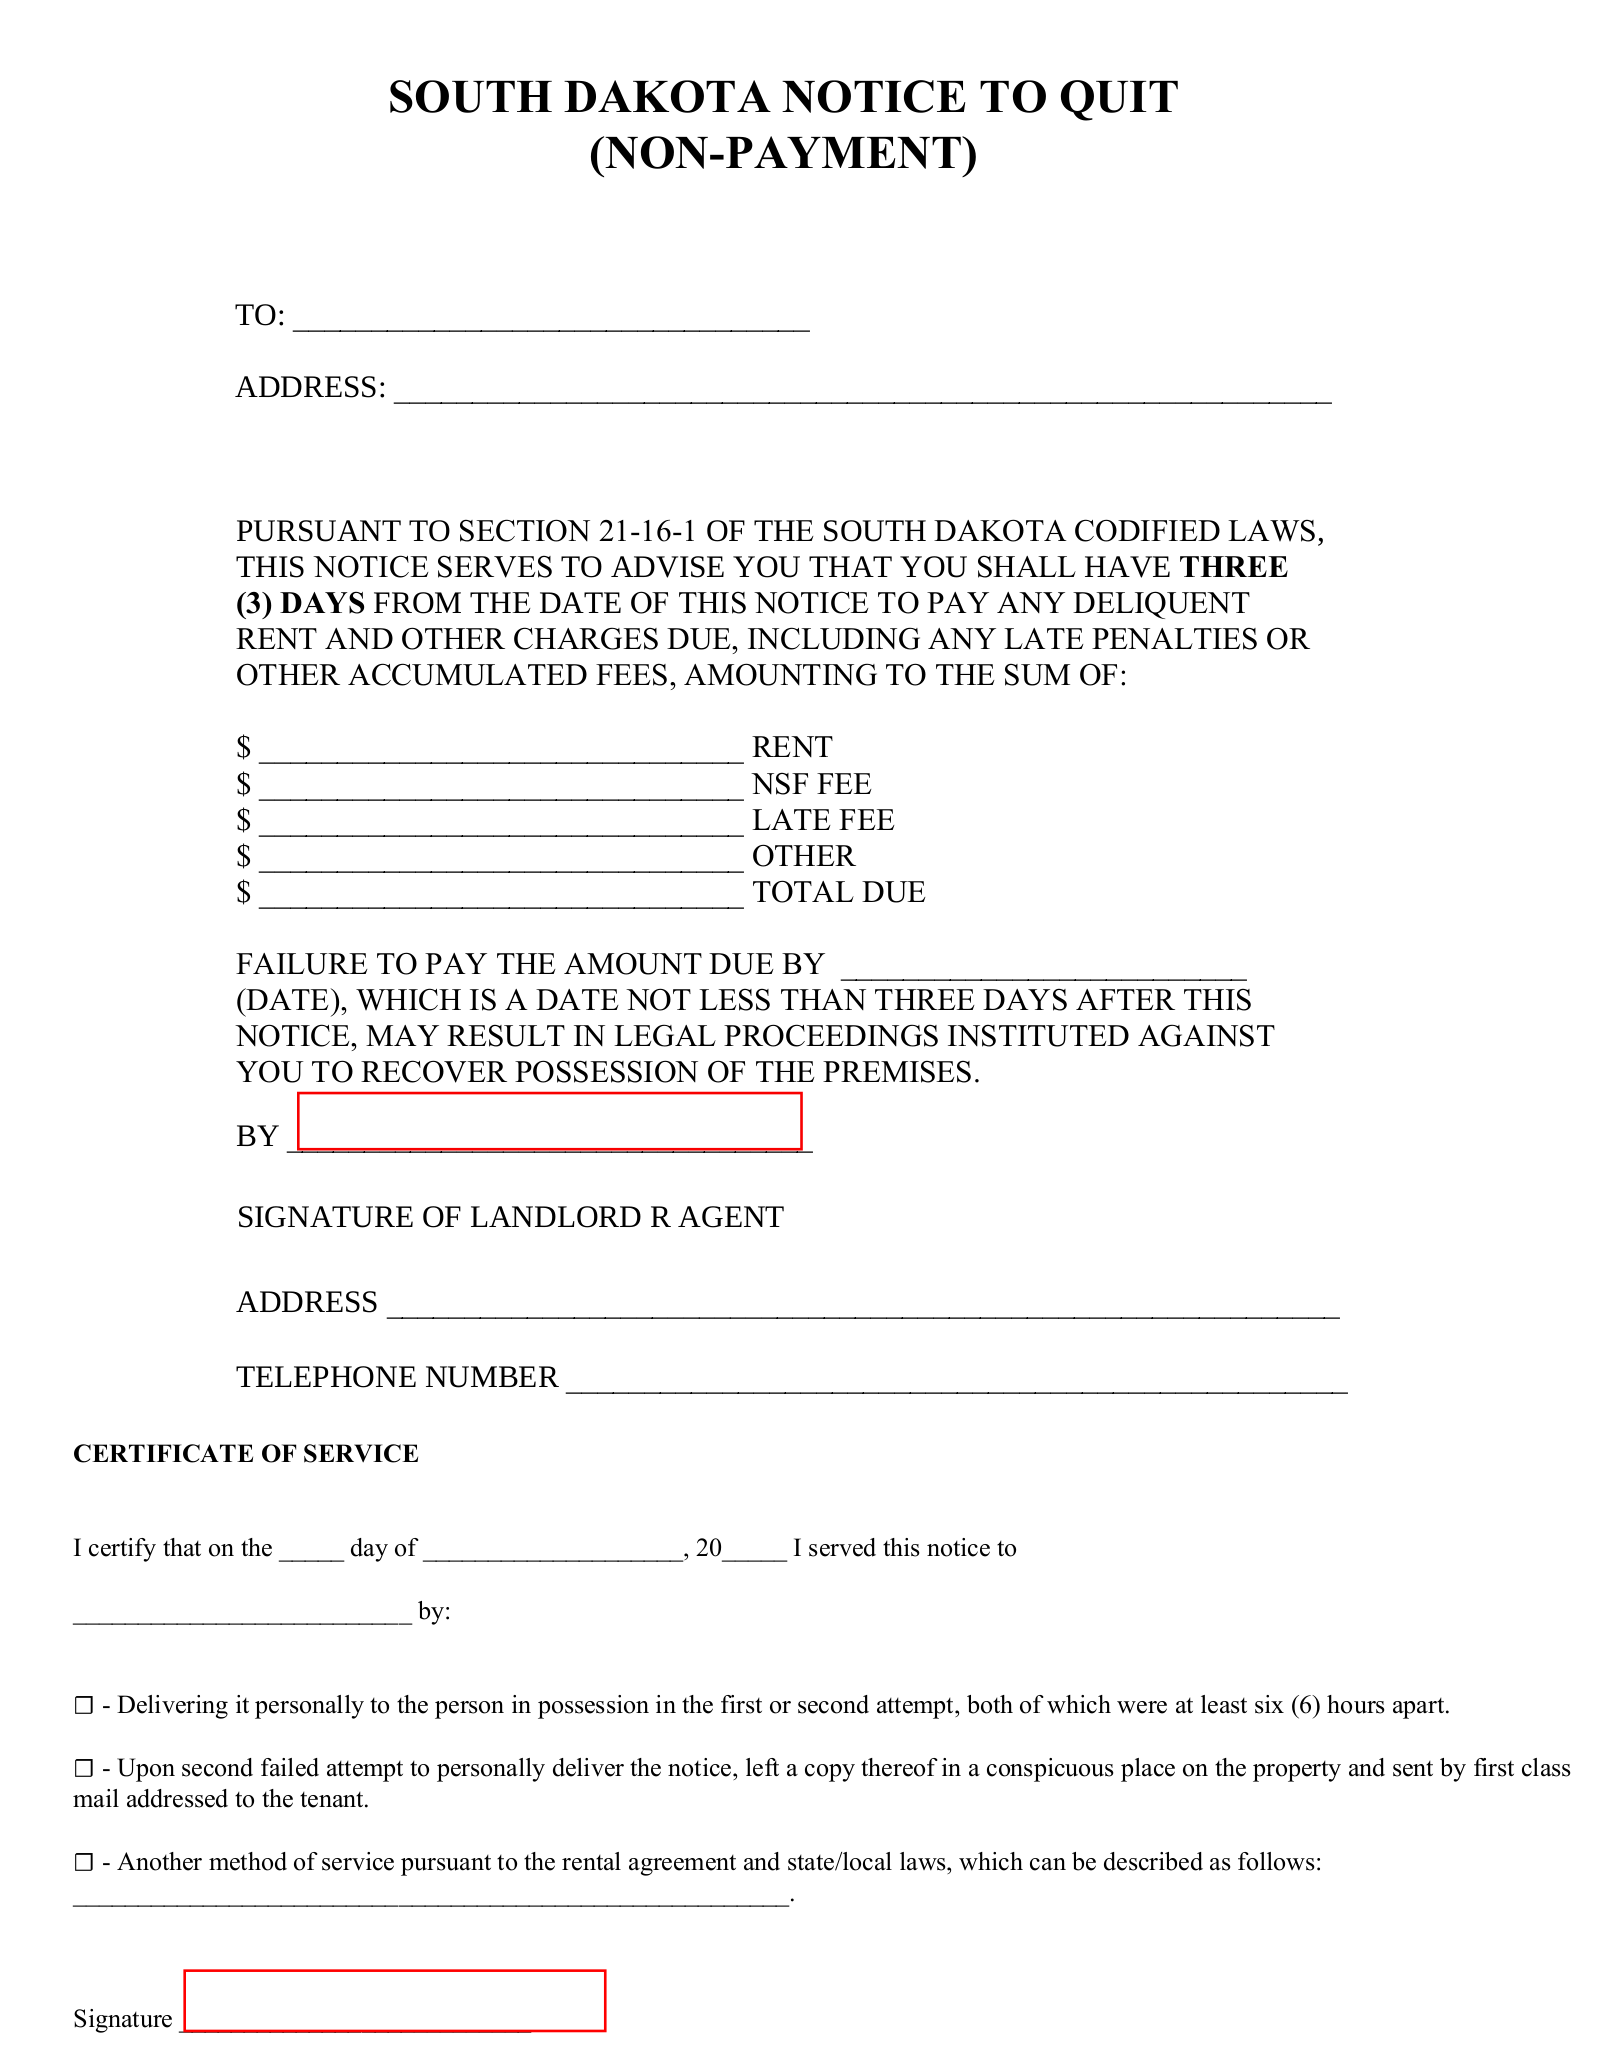 South Dakota 3-Day Notice to Quit Form | Non-Payment